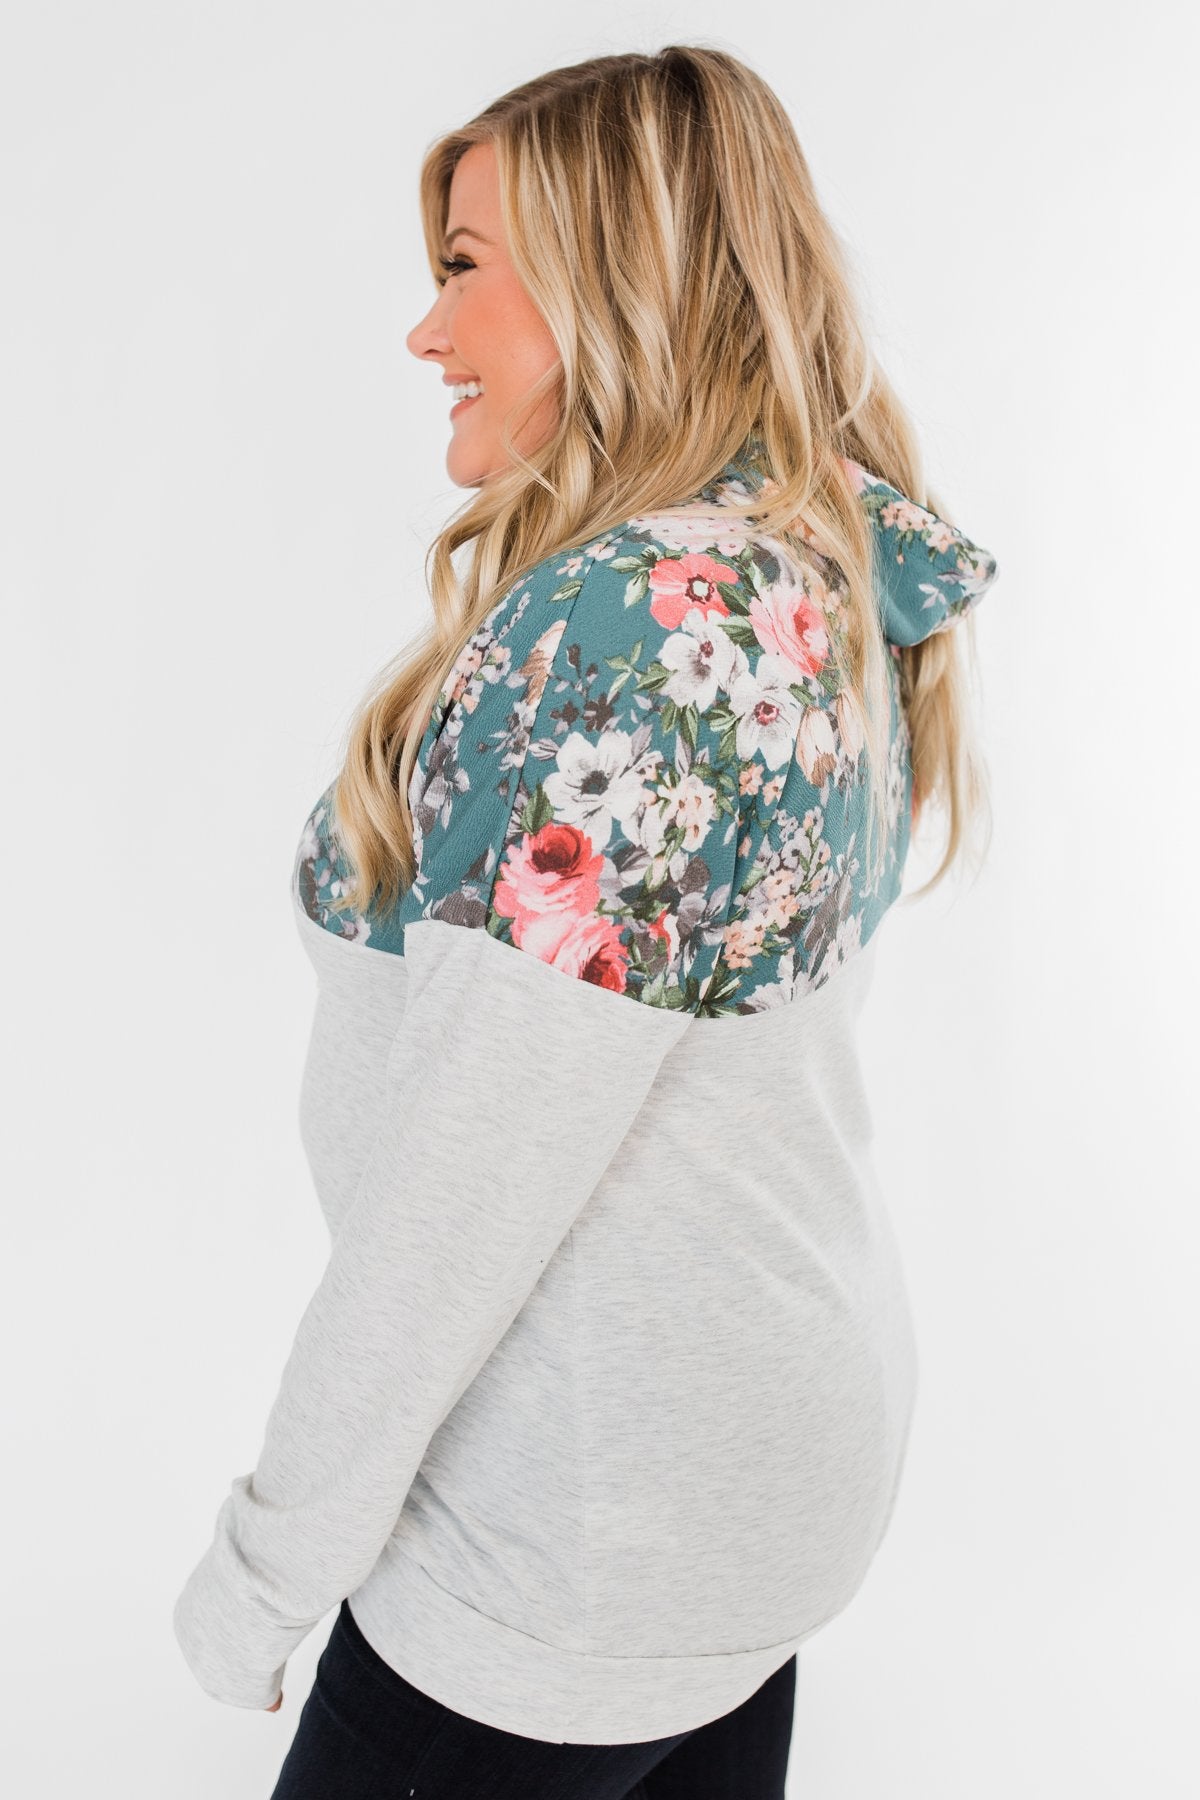 Most Beautiful Of Them All Cowl Neck Top- Heather Grey & Teal